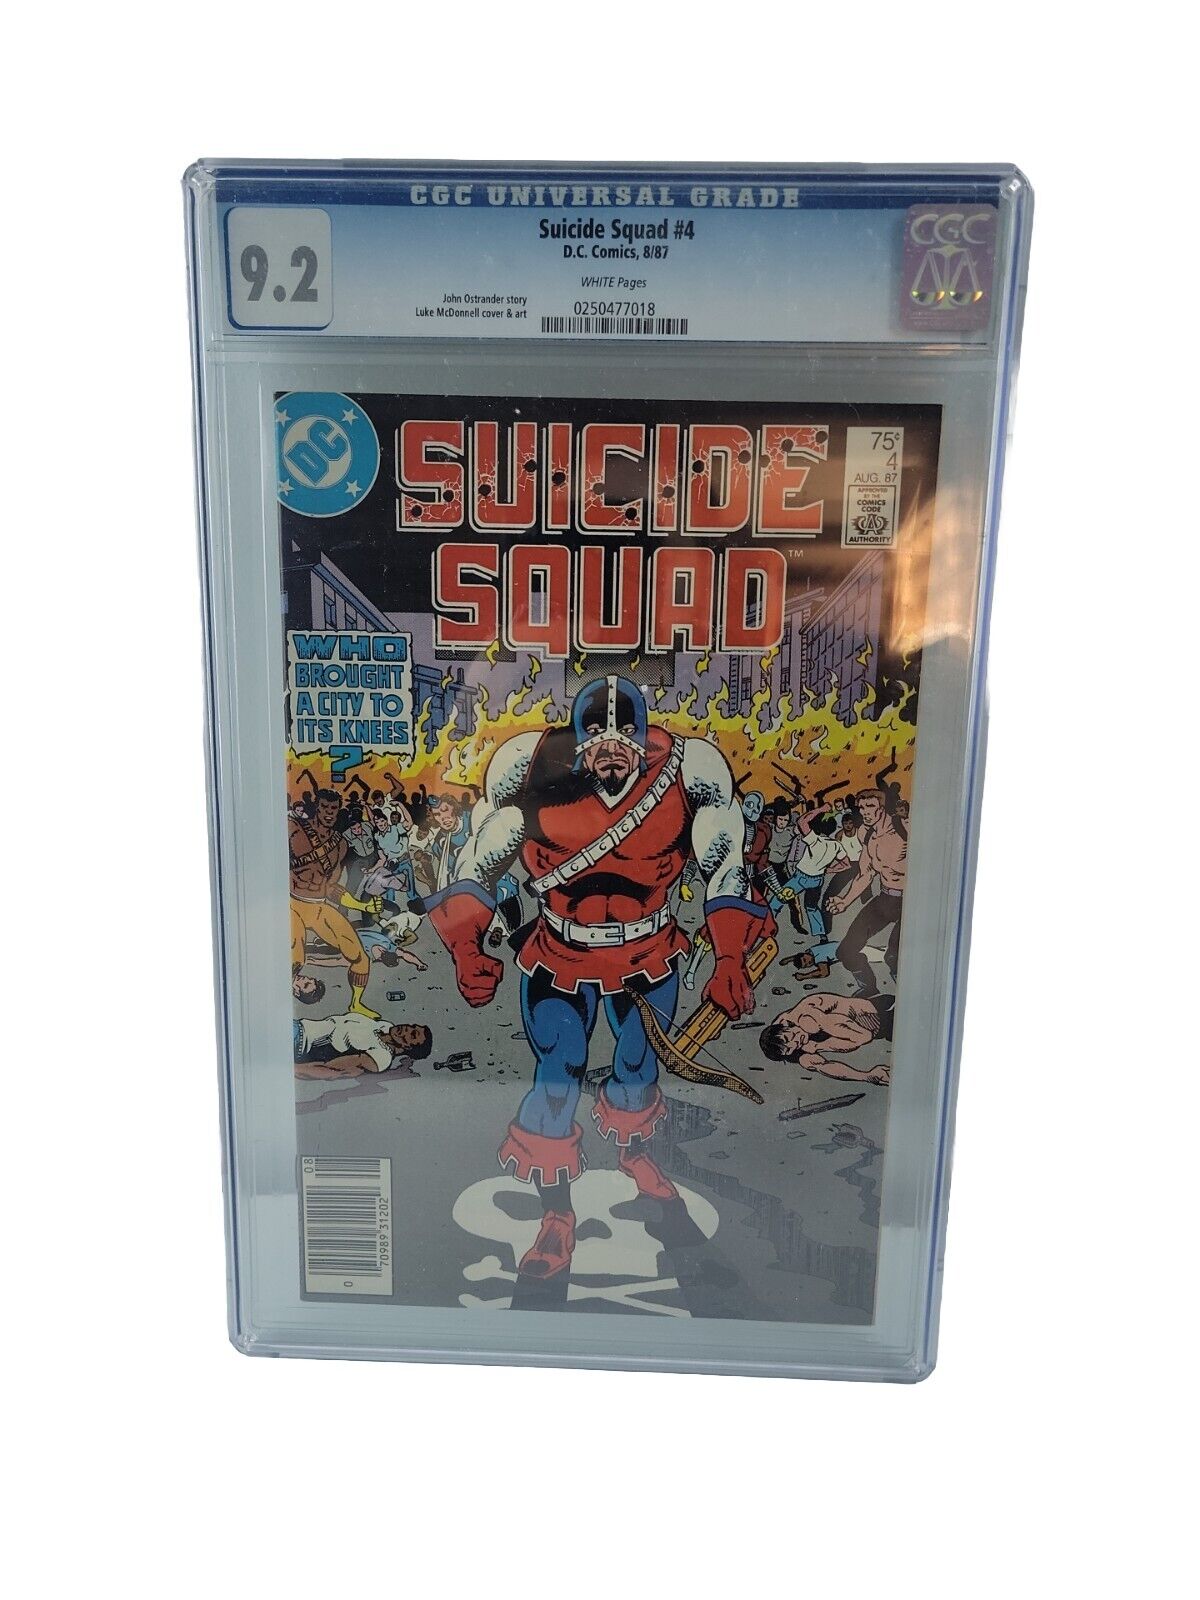 Suicide Squad (1st Series) #4 - VF/NM - William Hell's Overture CGC 9.2